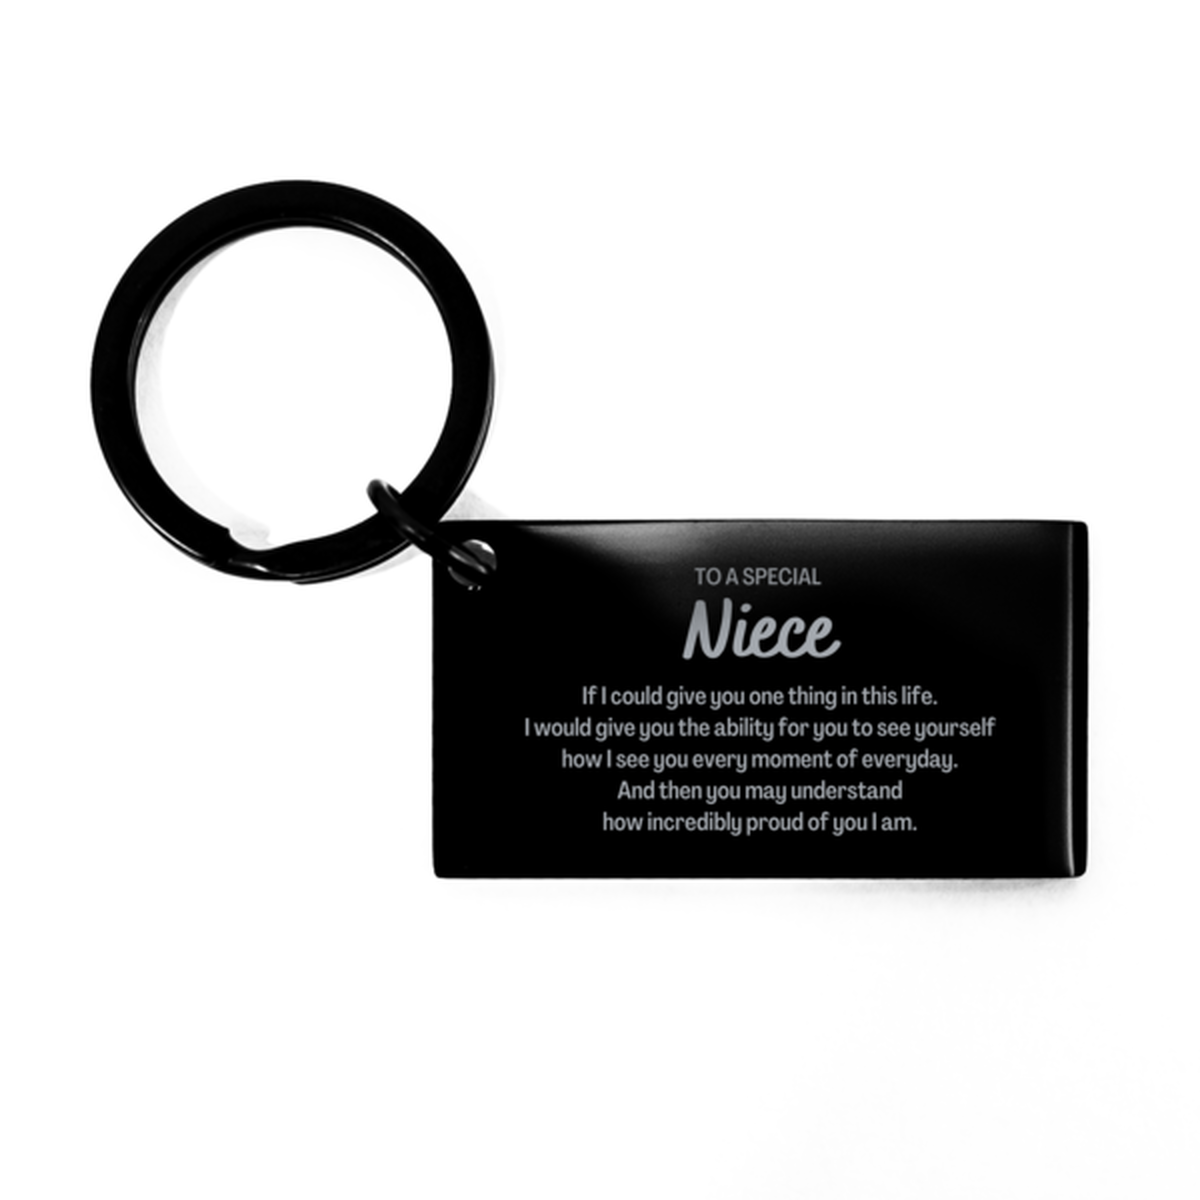 To My Niece Keychain, Gifts For Niece Engraved, Inspirational Gifts for Christmas Birthday, Epic Gifts for Niece To A Special Niece how incredibly proud of you I am